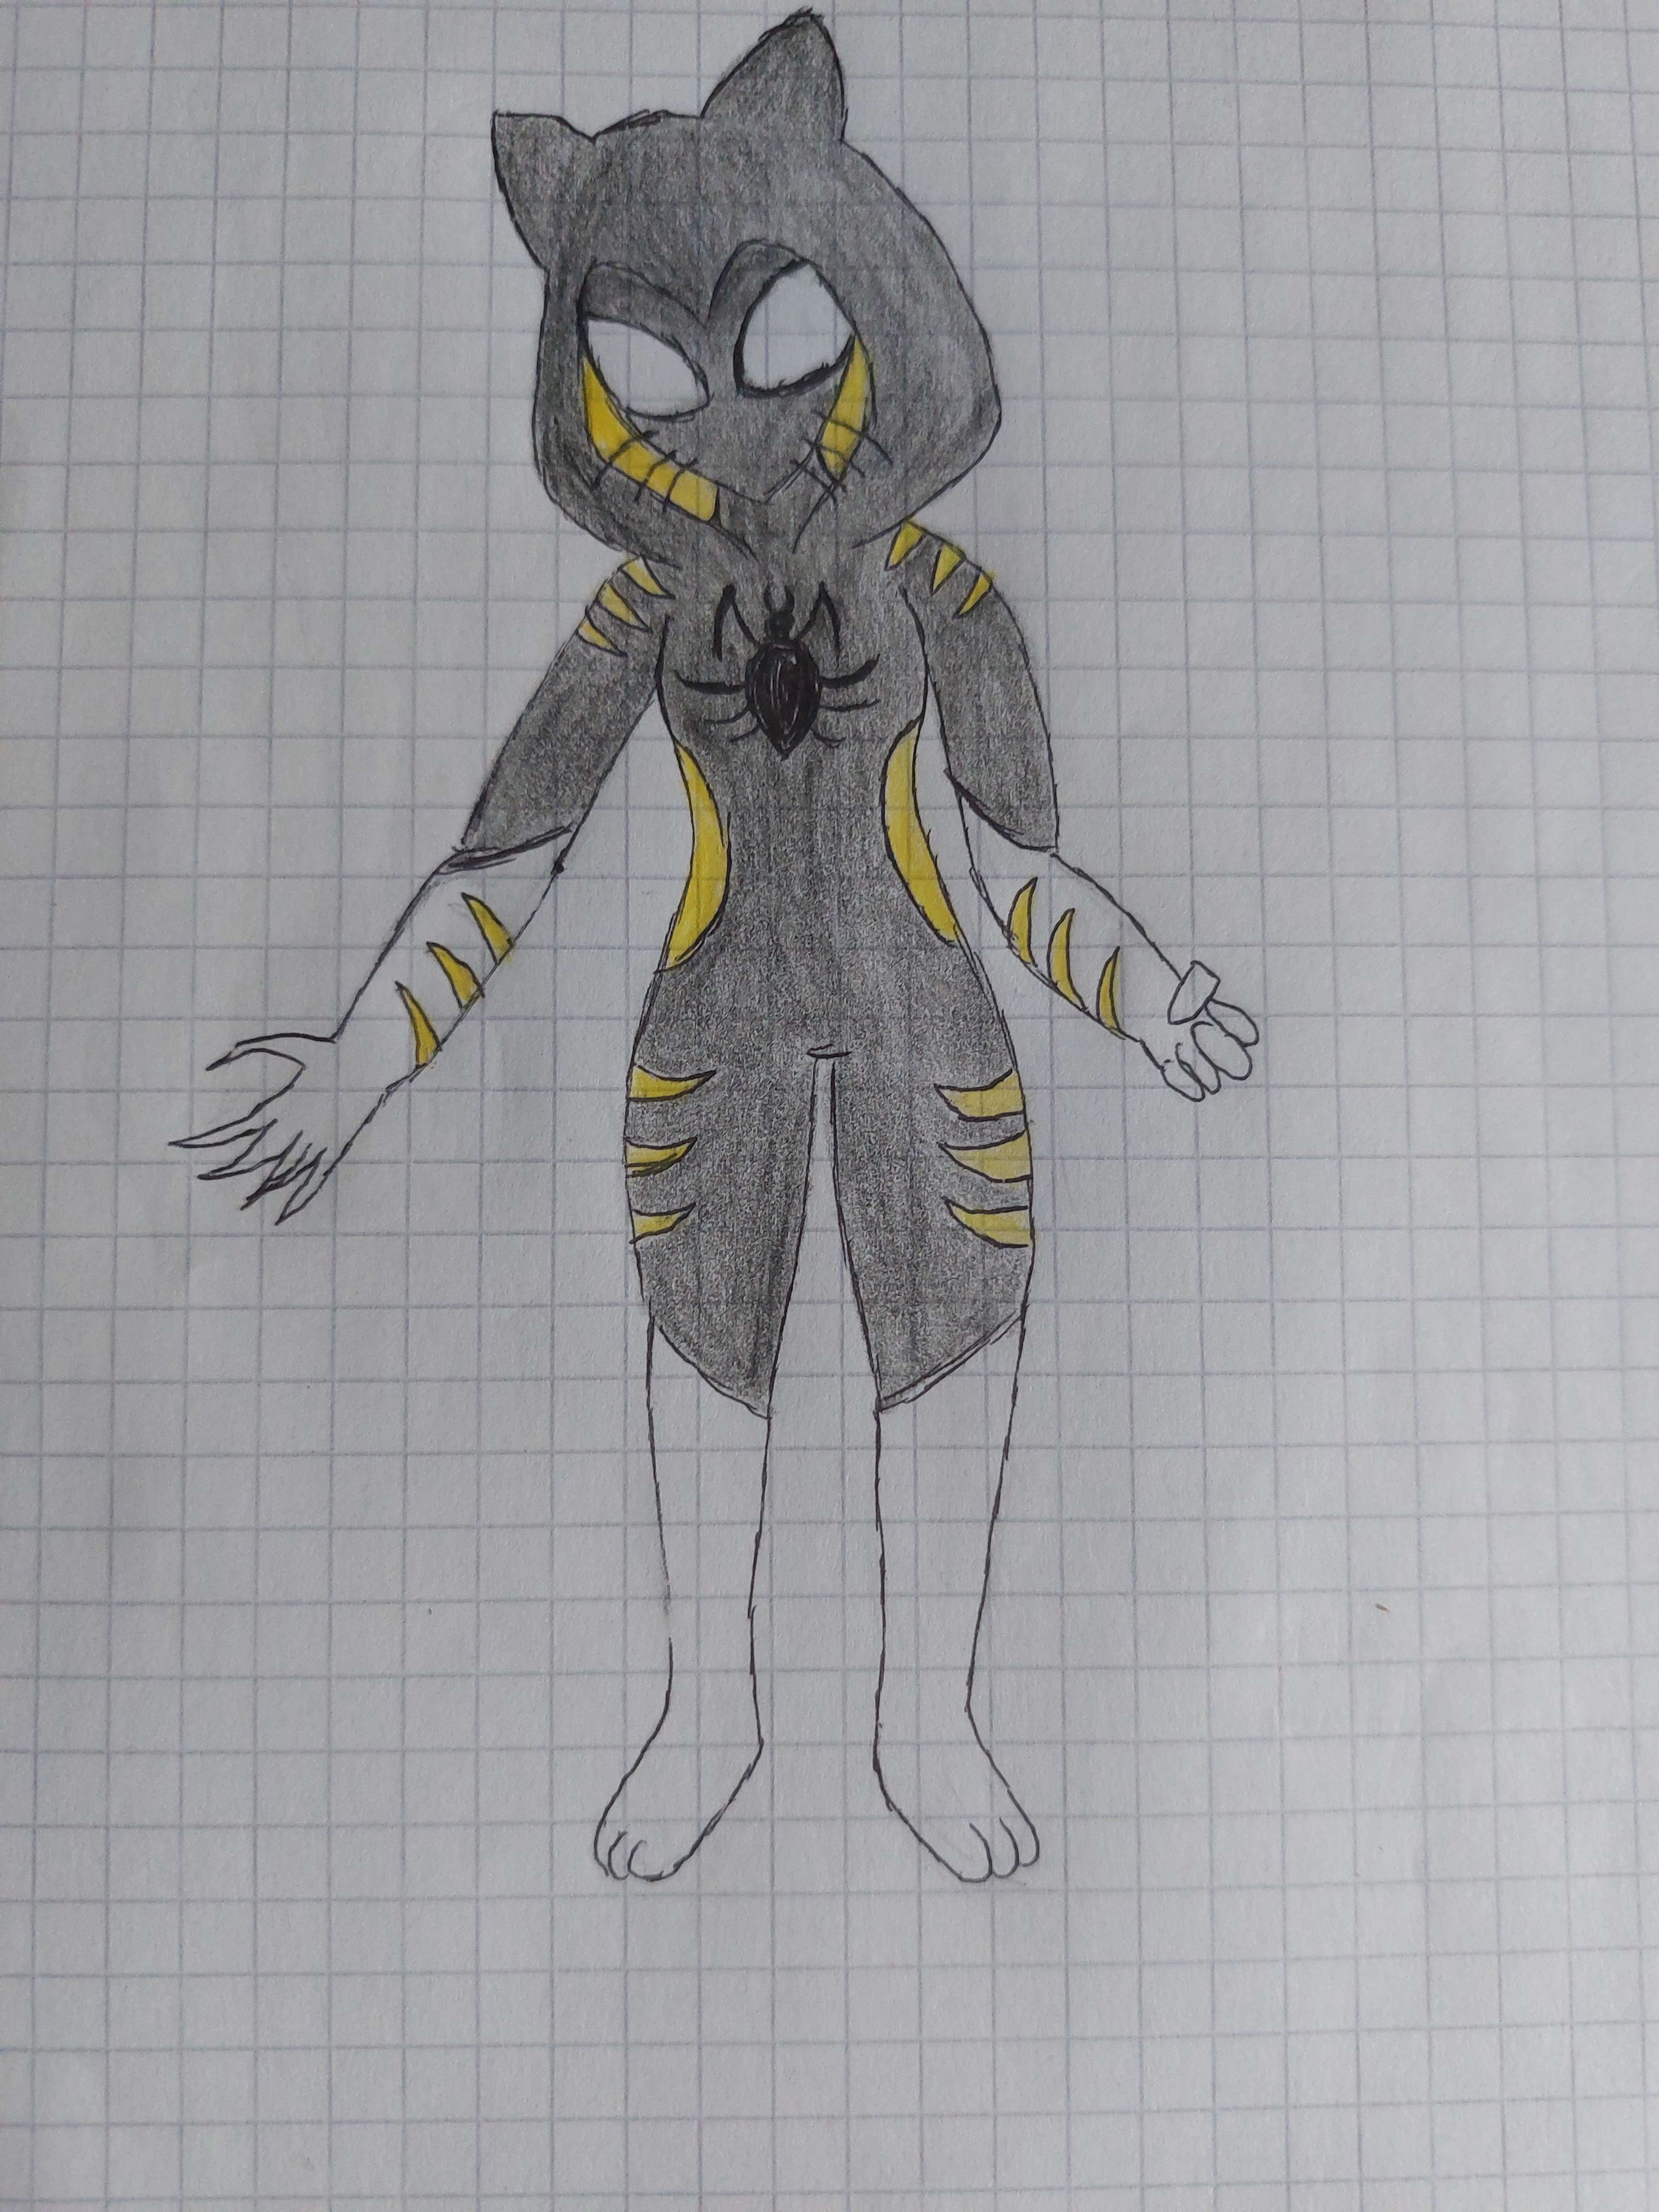 I posted this in r/cosplay, and a friend suggested I also post here! This  is my Spidersona, Spider-Gly. She took months to design and bring to life.  Hope you like her! 